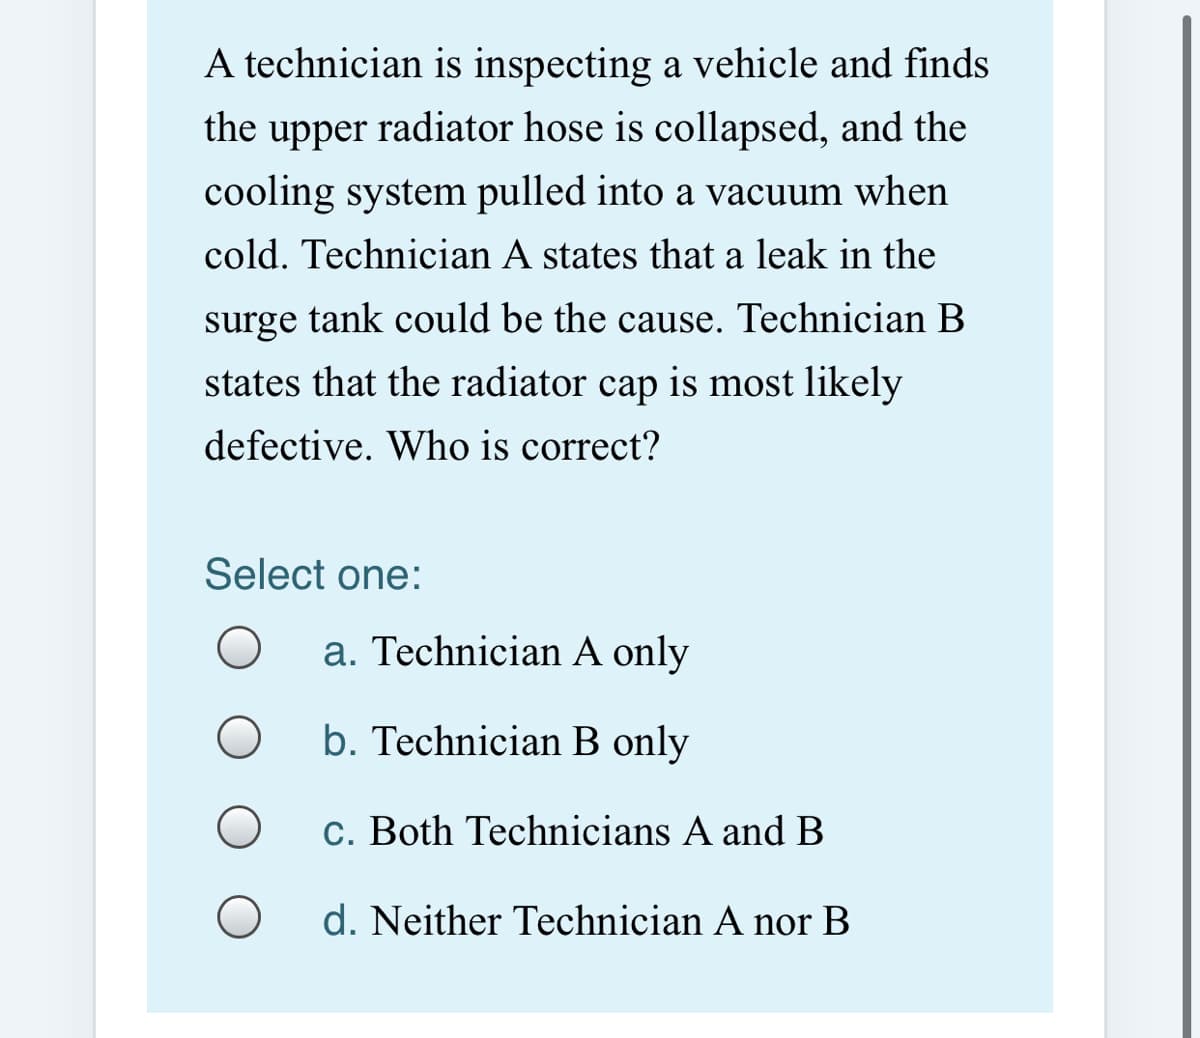 A technician is inspecting a vehicle and finds
the upper radiator hose is collapsed, and the
cooling system pulled into a vacuum when
cold. Technician A states that a leak in the
surge tank could be the cause. Technician B
states that the radiator cap is most likely
defective. Who is correct?
Select one:
a. Technician A only
b. Technician B only
c. Both Technicians A and B
d. Neither Technician A nor B
